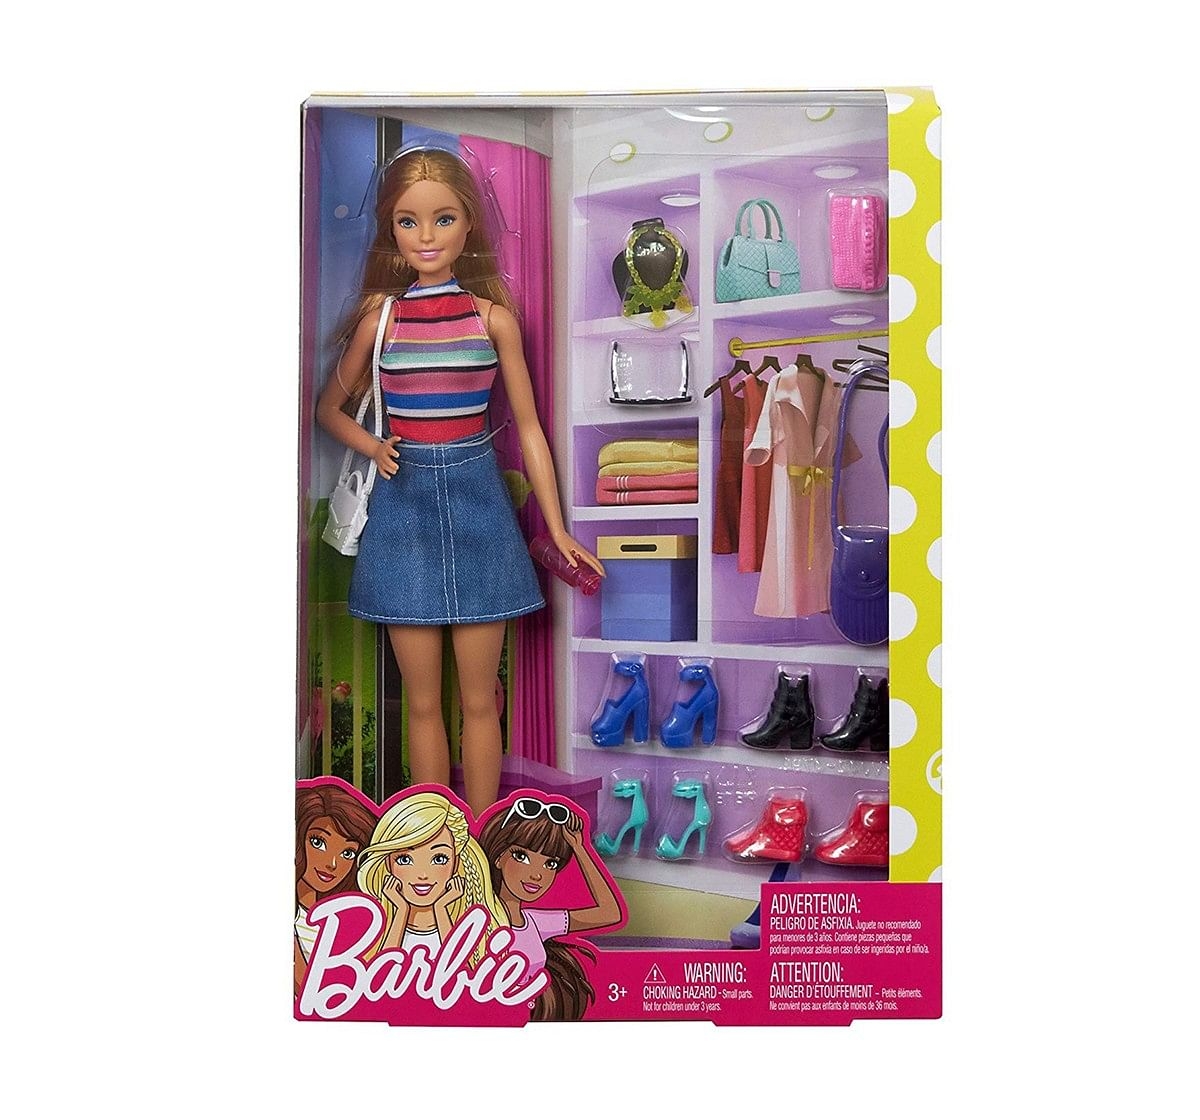 Barbie Doll & Shoe Blonde, Multi Color Dolls & Accessories for Kids age 3Y+, Assorted